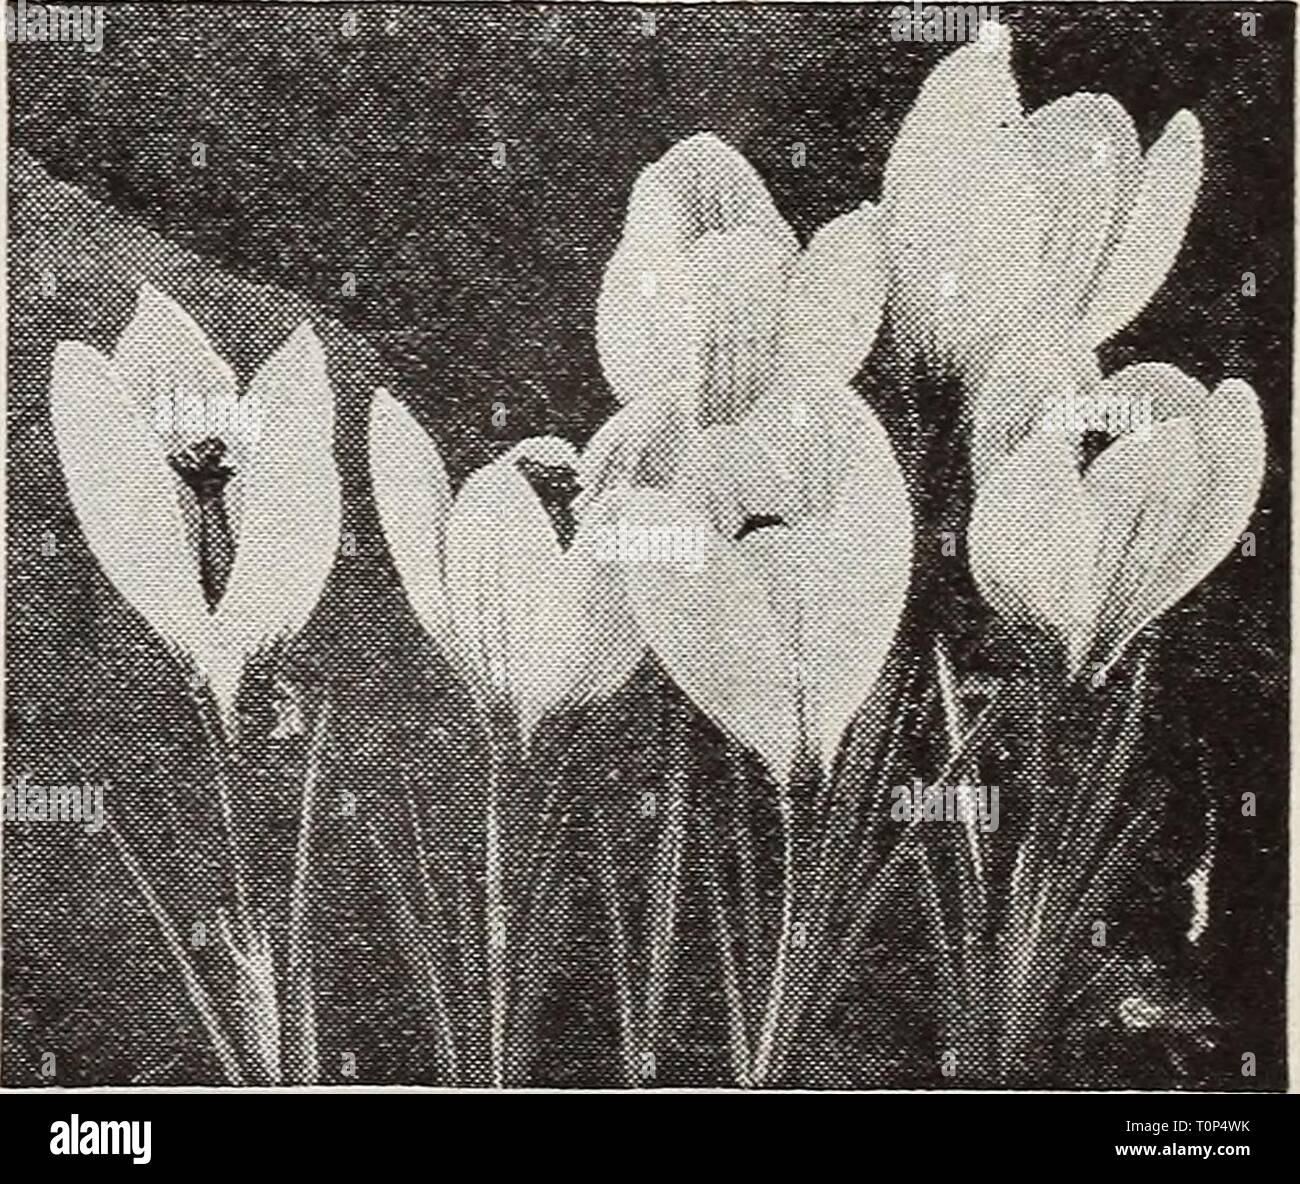 Dreer's bulbs plants, shrubs and Dreer's bulbs plants, shrubs and seeds for fall planting : autumn 1937  dreersbulbsplant1937henr Year: 1937  Chionodoxa sardensis brings to the spring garden lovely flowers of a rich deep blue year after year.    Crocus are indispensable in the spring garden. Collections of Giant-Flowering Crocus These collections contain the 6 Giant- Flowering varieties described on this page. They will give you a splendid spot of color in your garden. 36 bulbs, 6 of each variety for $1.35 72 bulbs, 12 of each variety for 2.60 150 bulbs, 25 of each variety for 4.75 300 bulbs,  Stock Photo